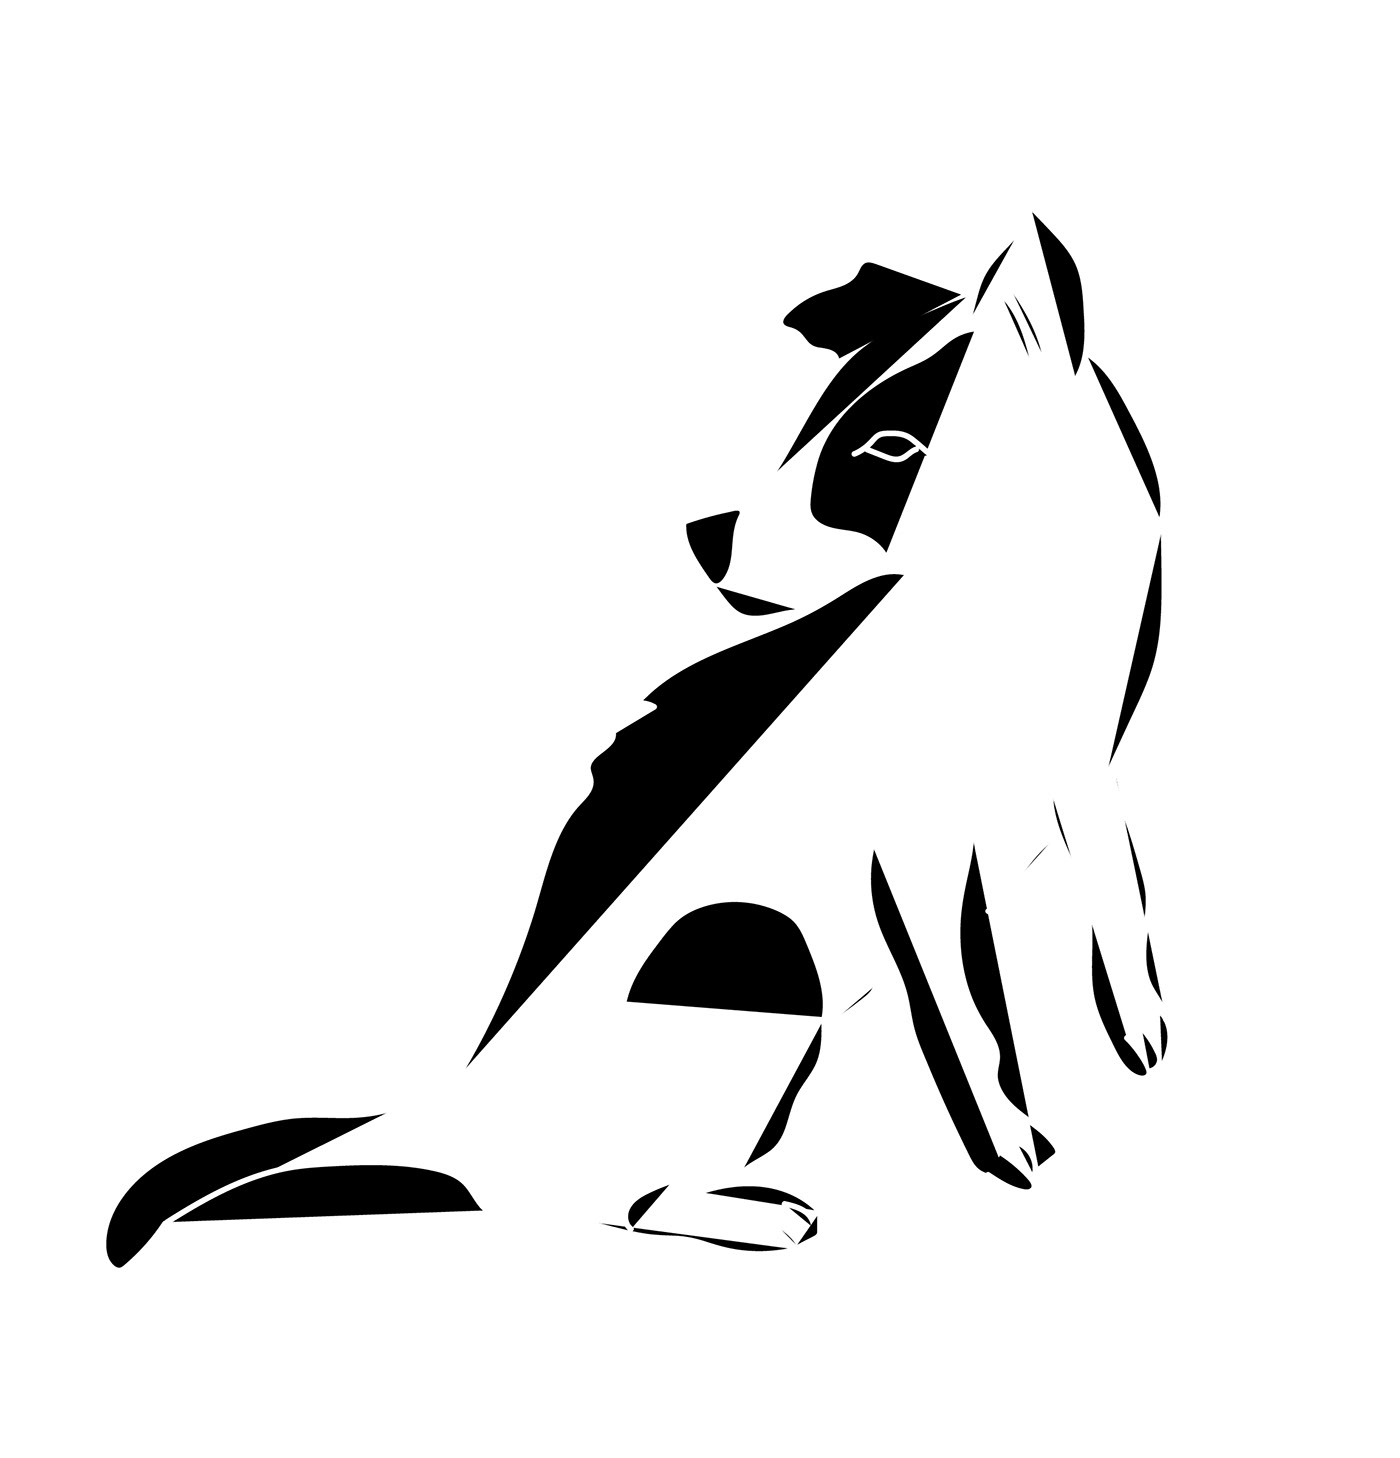 A little sketch I did turned into an Illustrator design. This is a border collie pup I photographed.